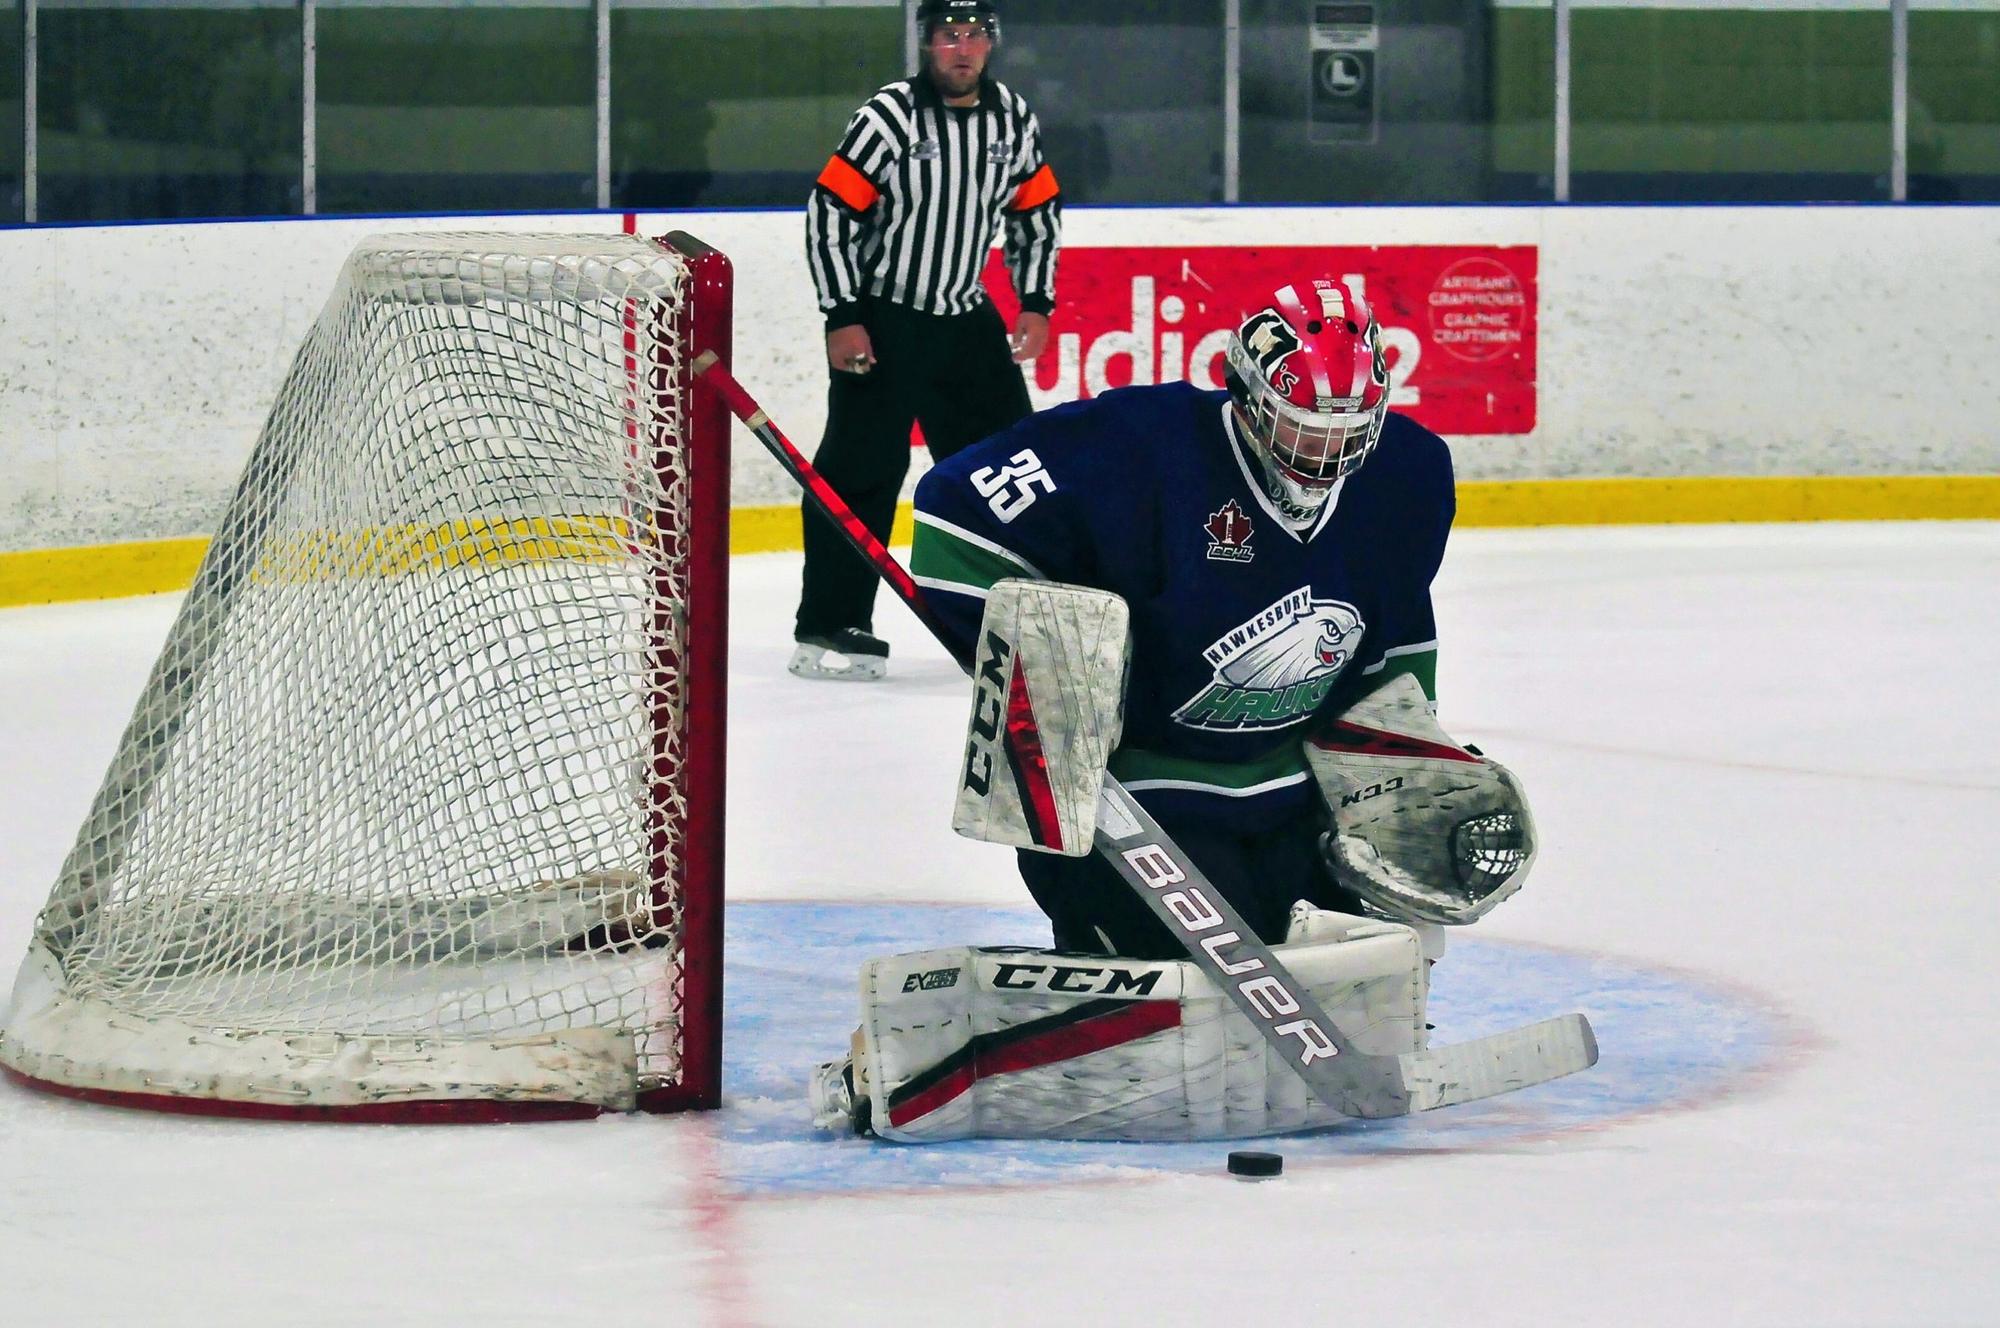 Hawks drop 4-3 shootout loss to Renfrew, earn three of four points on the weekend